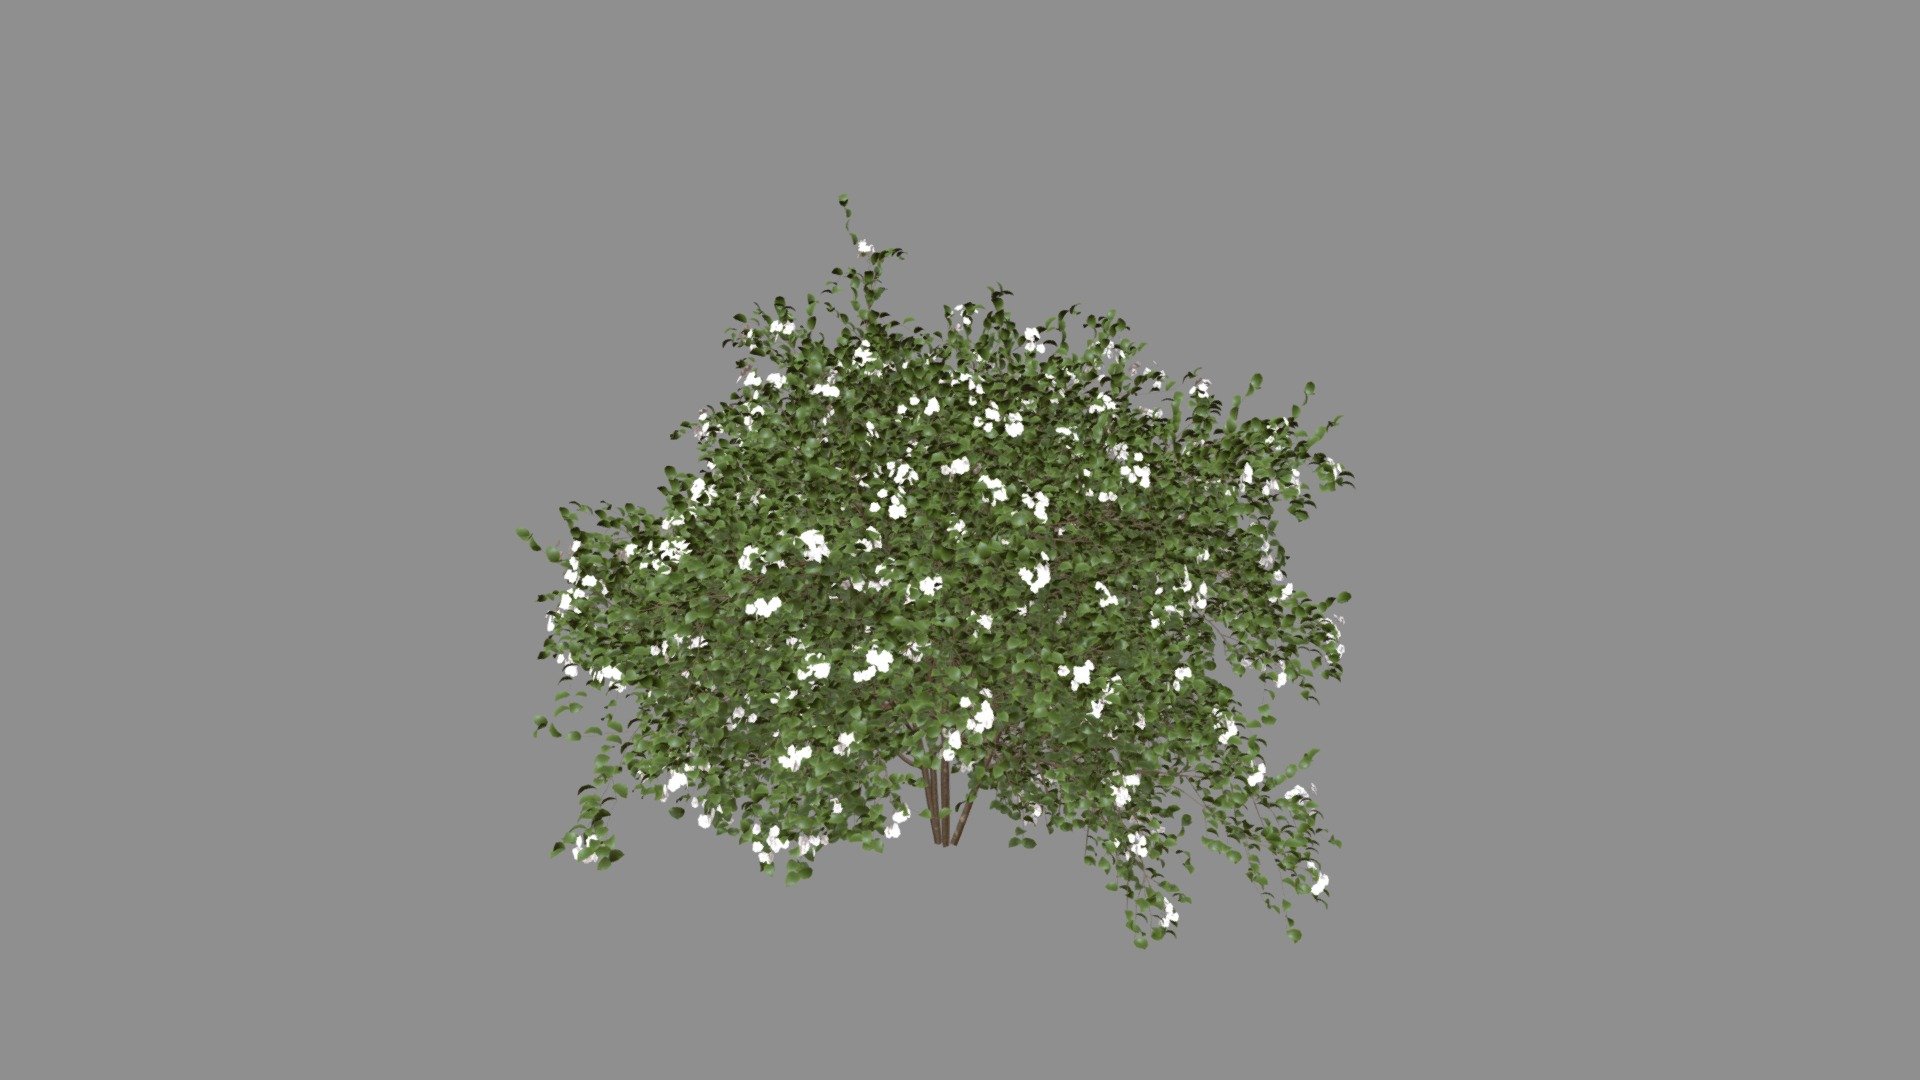 Get a unique Cornus racemosa 3D model in bloom: Delicate white flowers dance on fresh green leaves, perfect for spring scenes.

The Cornus racemosa, also known as the Gray Dogwood, is a deciduous shrub that brings year-round beauty and ecological value to any landscape. With its graceful form, delicate flowers, and vibrant foliage, it's no wonder this native North American plant is a favorite among gardeners and nature enthusiasts alike.

Easy to use, stunning results:
-Multiple formats for your favorite 3D software.
-High-quality textures bring every detail to life.
-Perfect for beginners and pros alike.

Perfect for:
-Game environments
-Architectural visualizations
-Art projects
-And more!

Bring nature's beauty to your digital world!
Create landscapes that tell stories, inspire, and transport viewers. This versatile pack is your key to stunning renders.

Check out this animation I made using Unreal Engine:
https://youtu.be/ee-5kfri7os - Cornus Racemosa Spring 02 - Buy Royalty Free 3D model by hkhalif 3d model